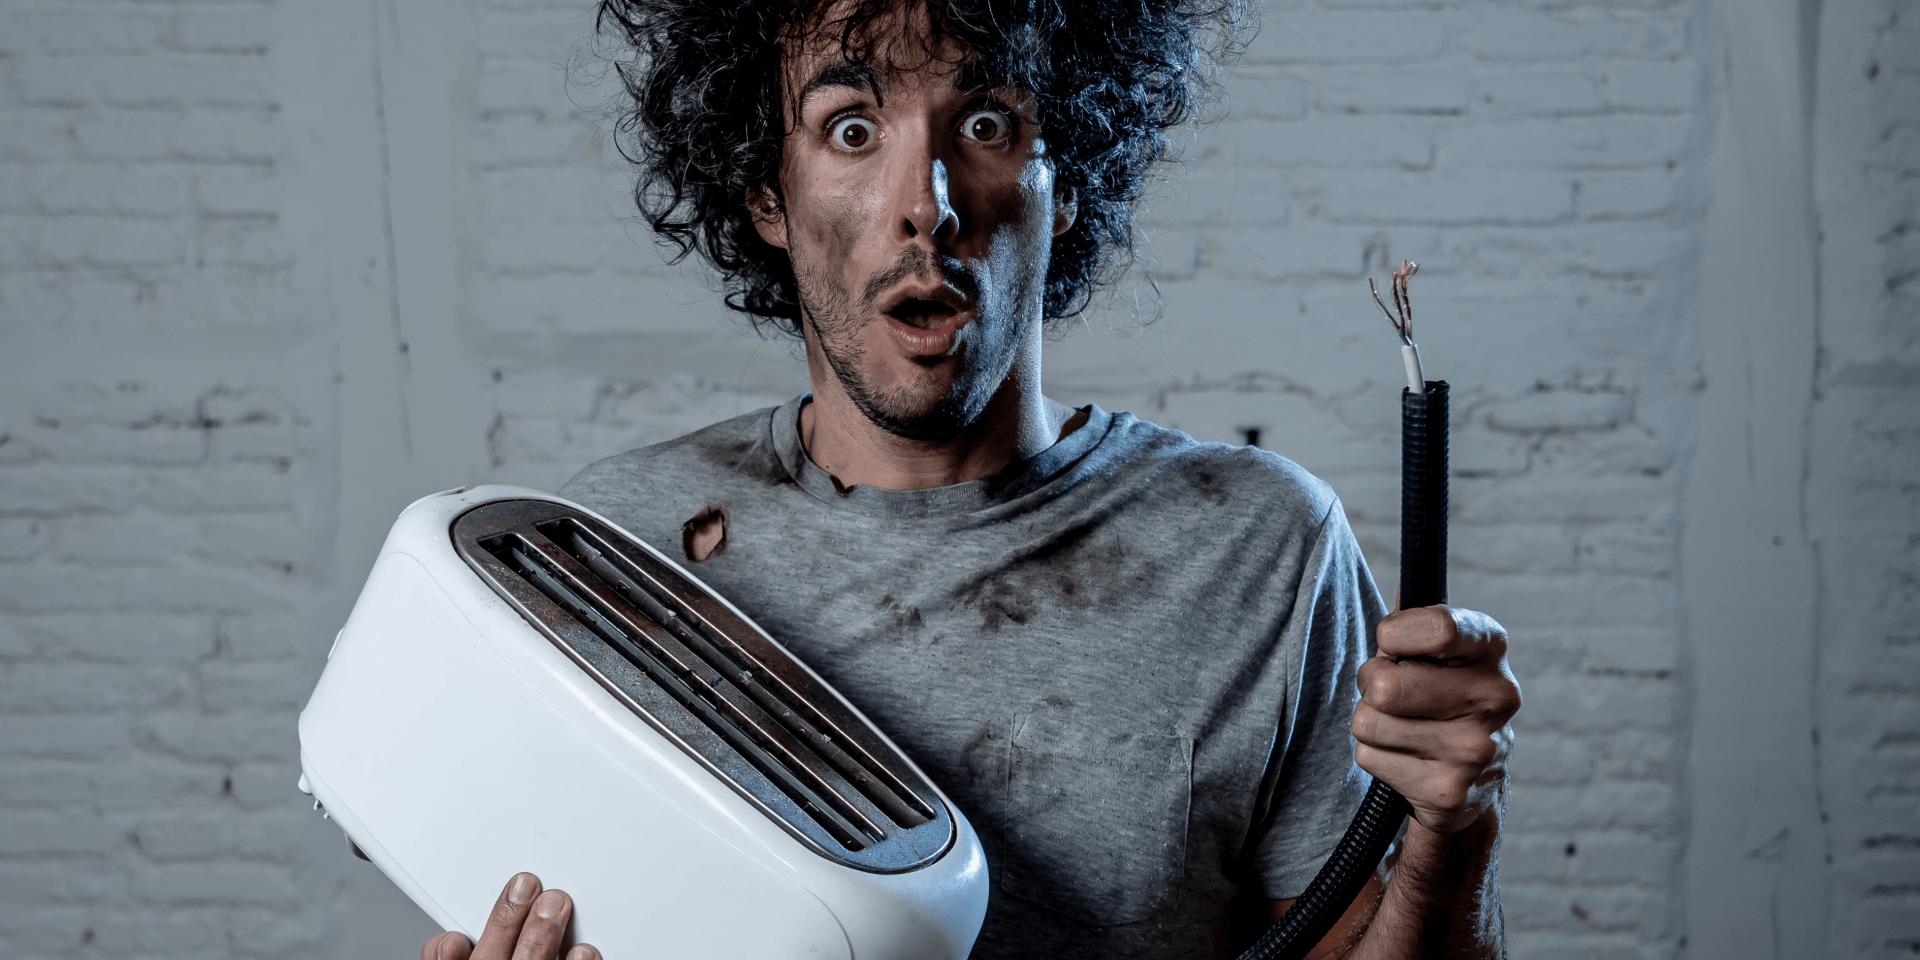 Man holding toaster - electric shock